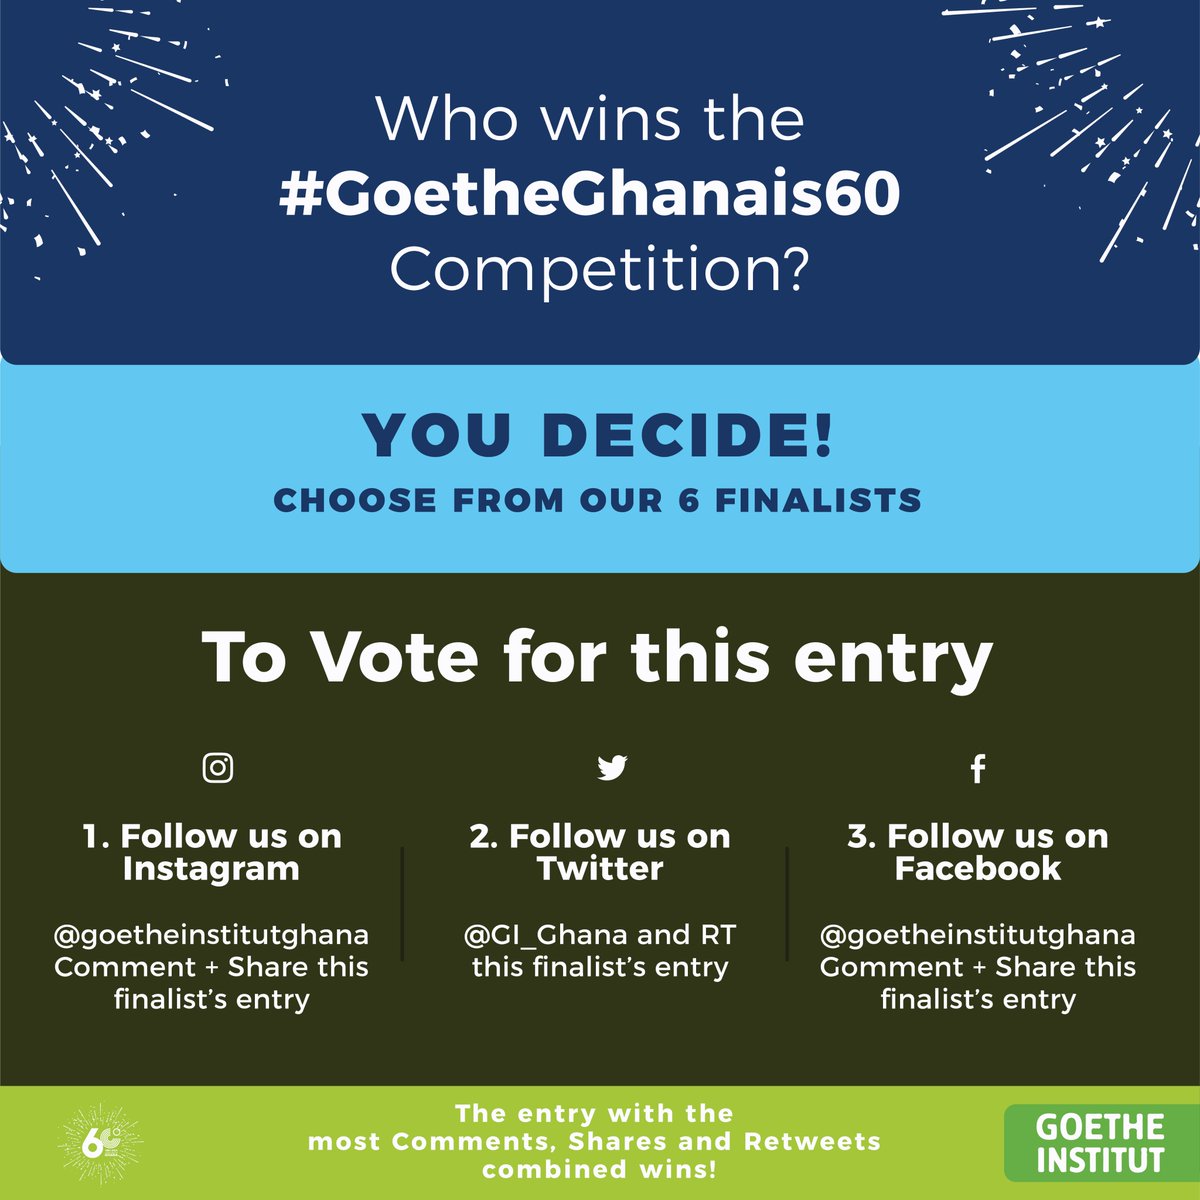 Who Wins the #GoetheGhanaIs60 Competition?

YOU DECIDE FROM OUR TOP 6 FINALISTS IN OUR FOLLOW UP POSTS !

_____
#prize #giveawaycontest #giveawayalert #artfromafrica #goetheinstitut #GoetheGhanaIs60 #goetheinstitutghana